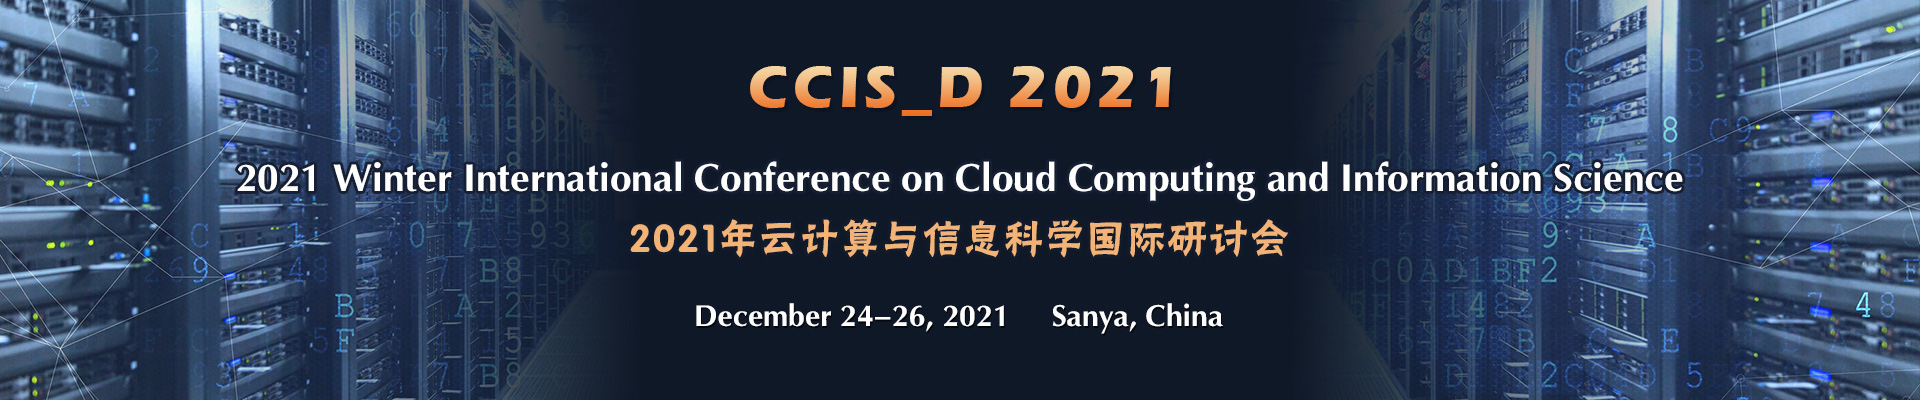 Int'l Conference on Cloud Computing and Information Science (CCIS_D 2021), Sanya, Hainan, China